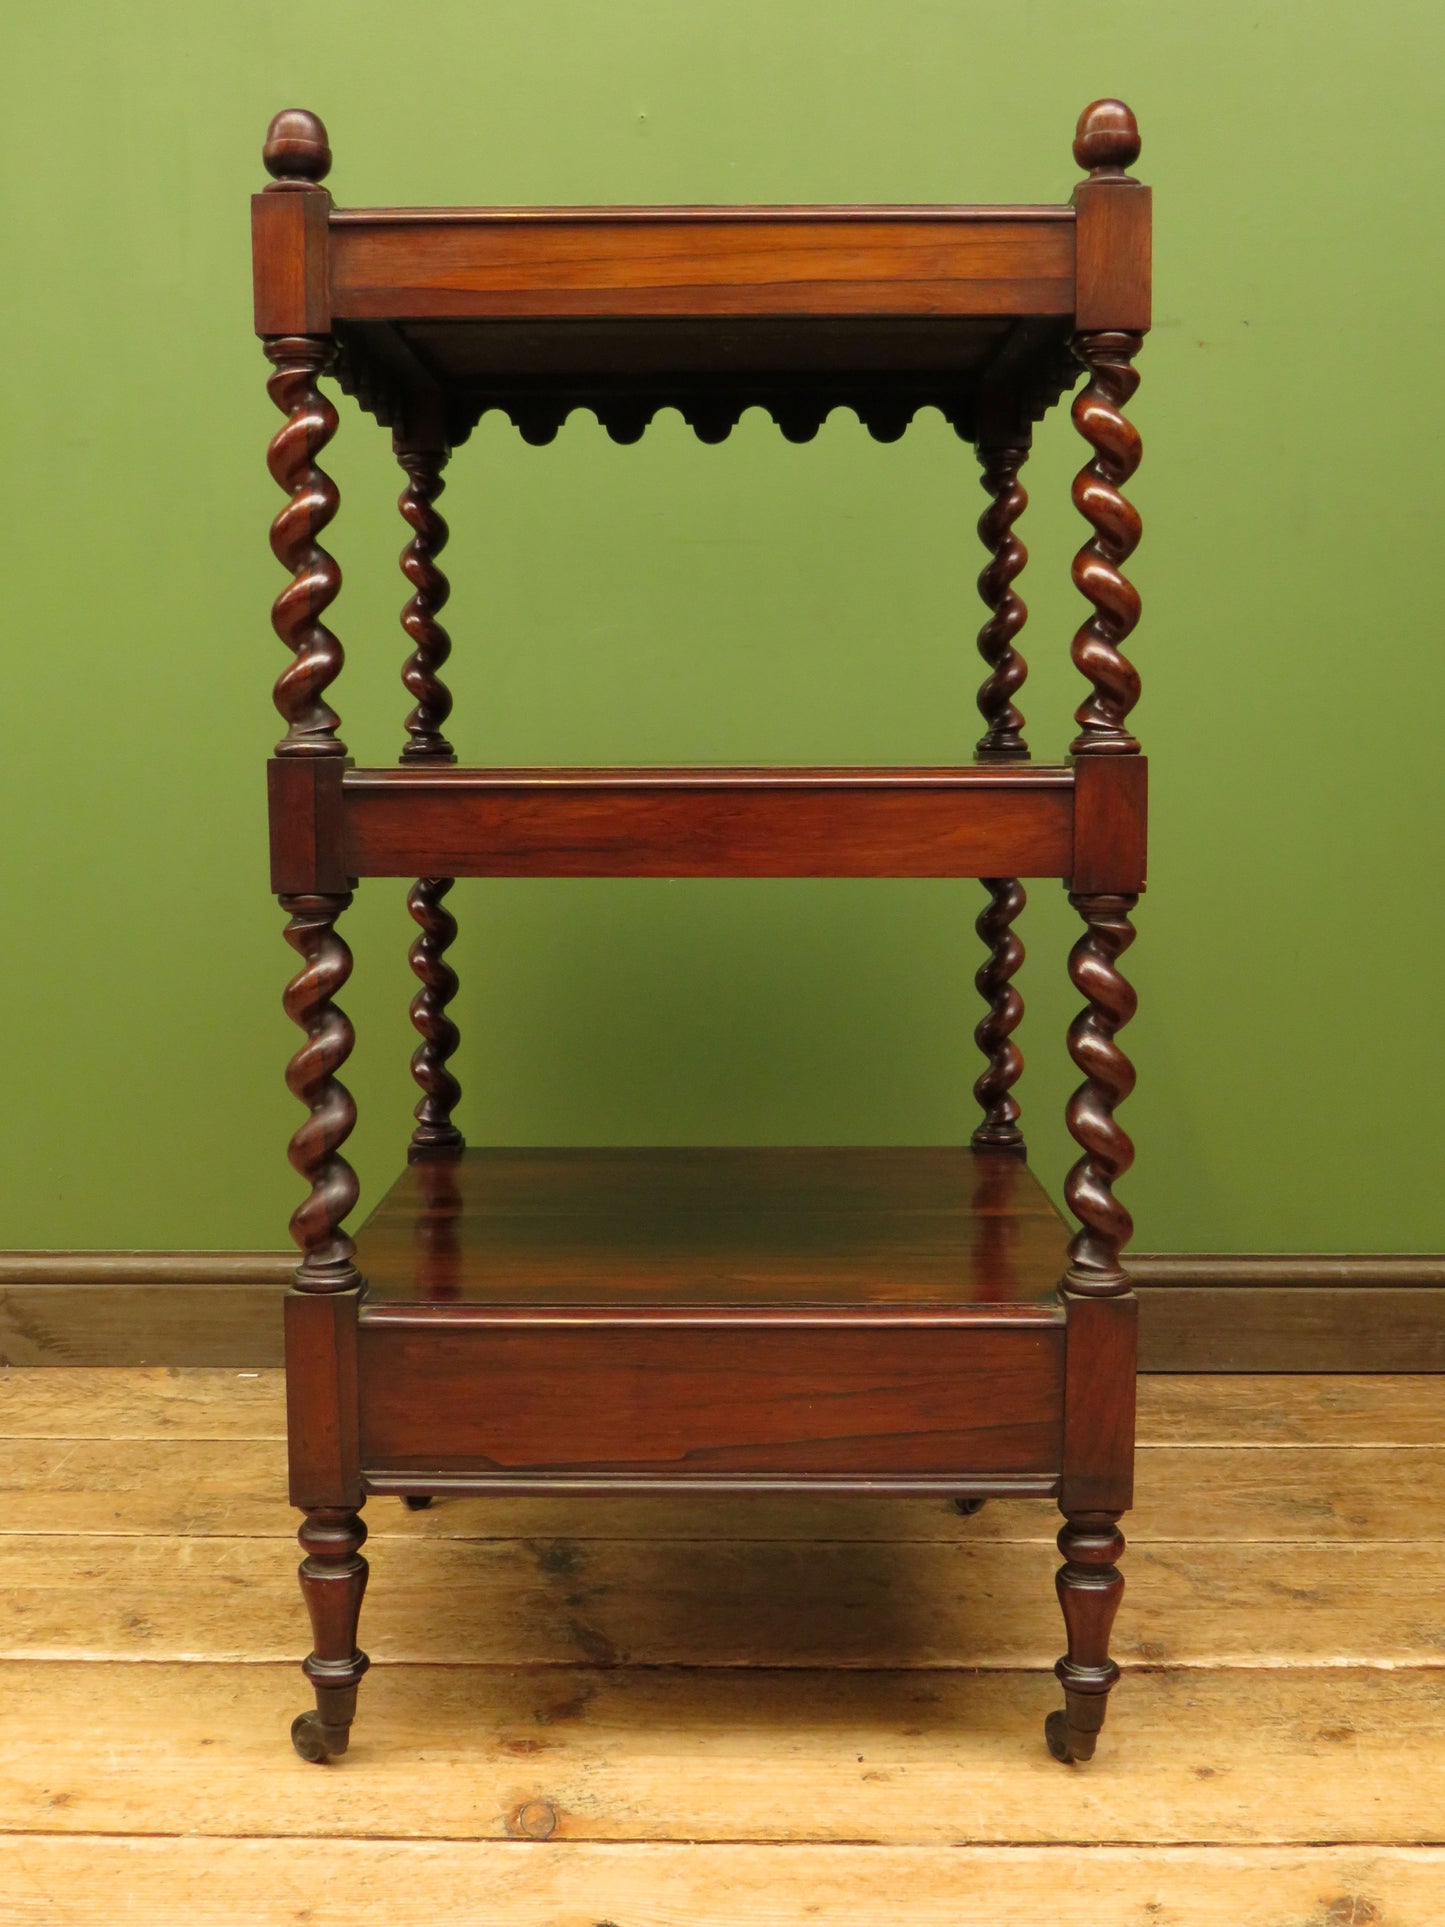 Antique Rosewood Whatnot Etagere